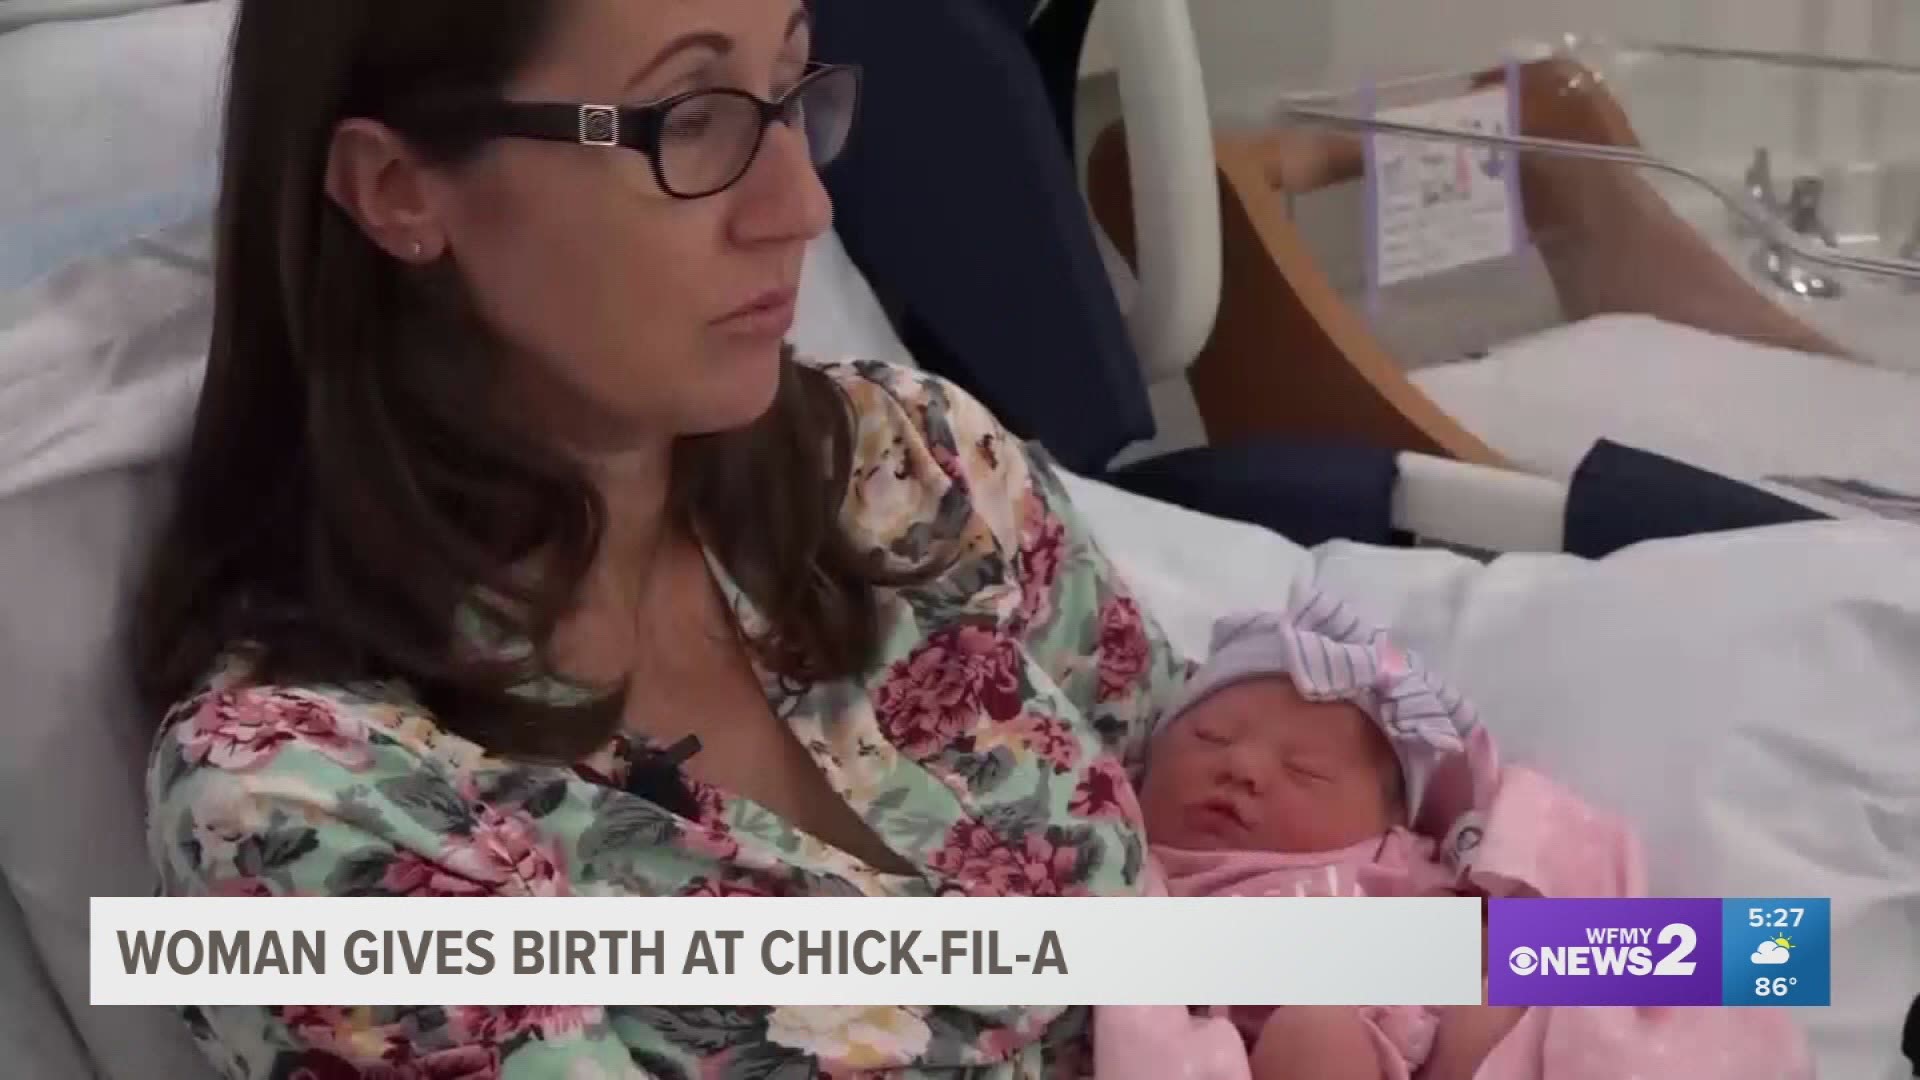 Baby Born at Chick-fil-A